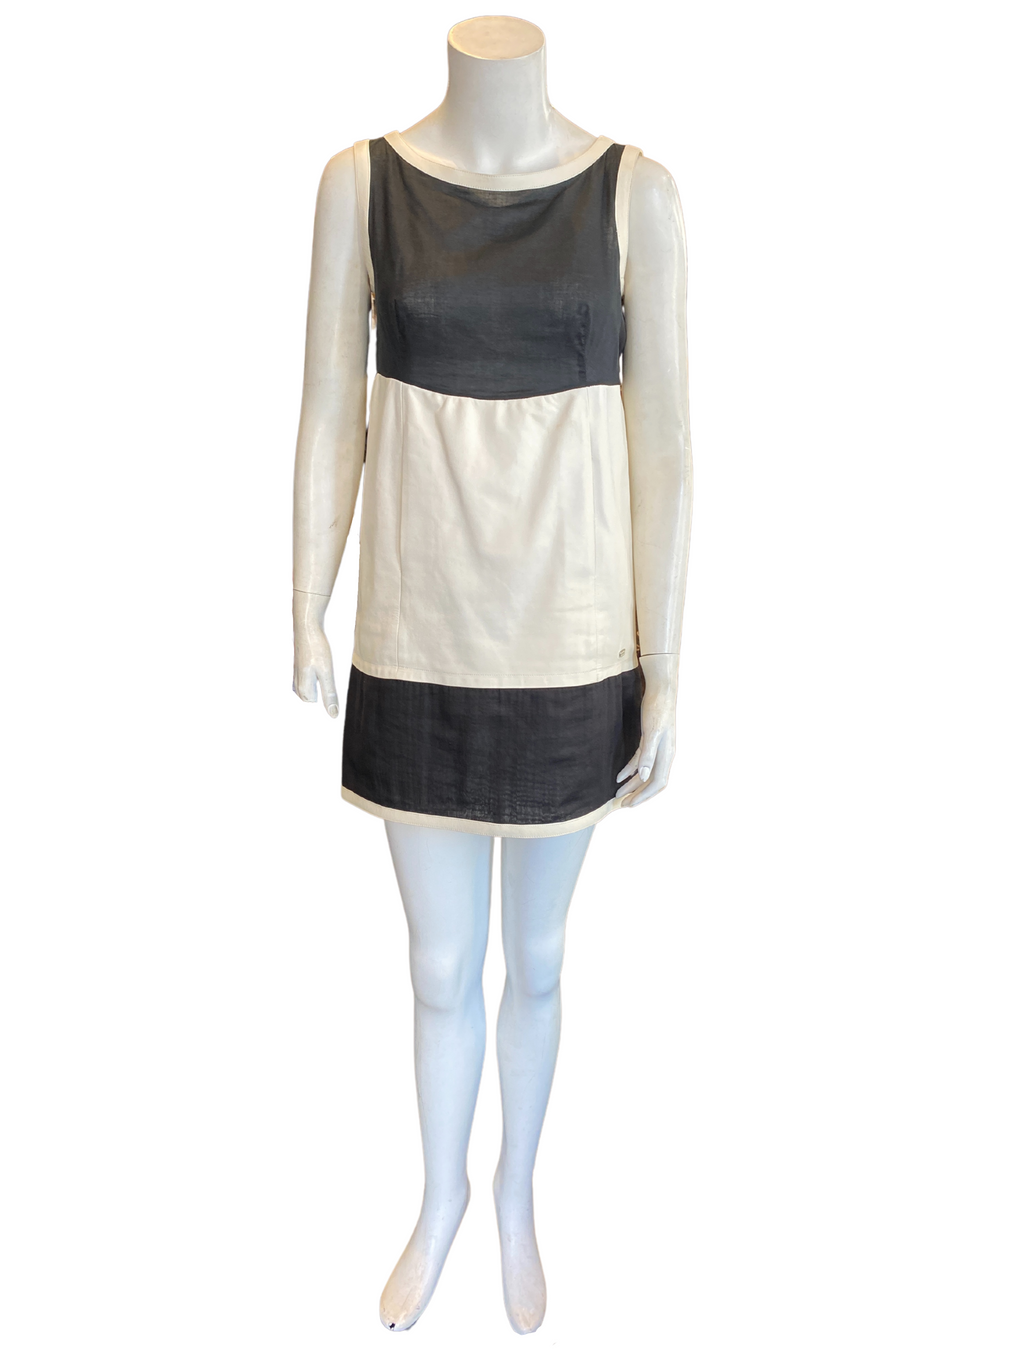 Chanel Spring '07 Leather & Cotton Dress, M, FR38, US6